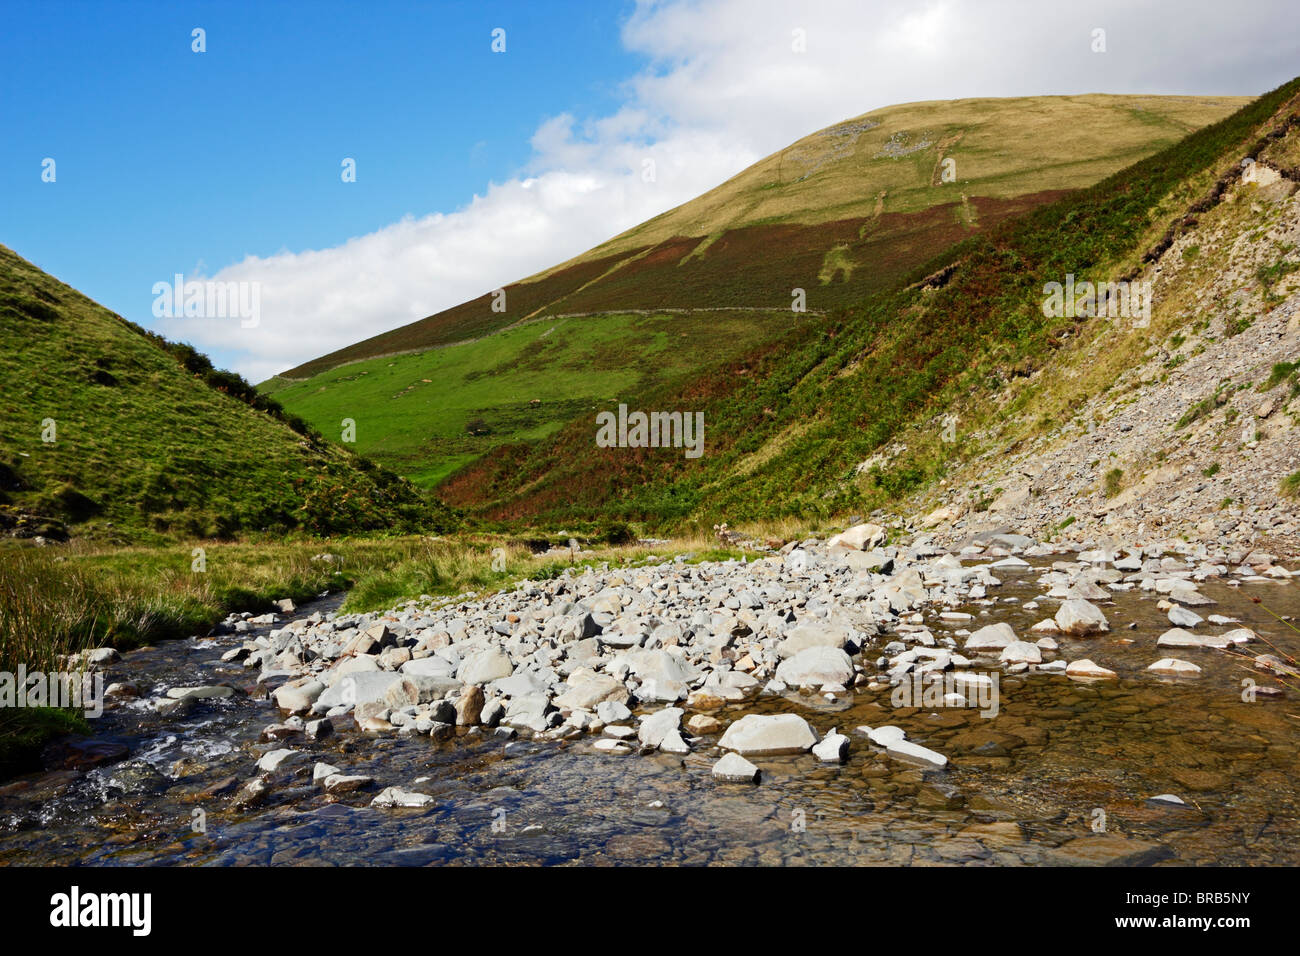 Carlingill Beck and Blease Fell near Sedbergh in the Howgill Fells, Yorkshire Dales National Park, Cumbria, England. Stock Photo